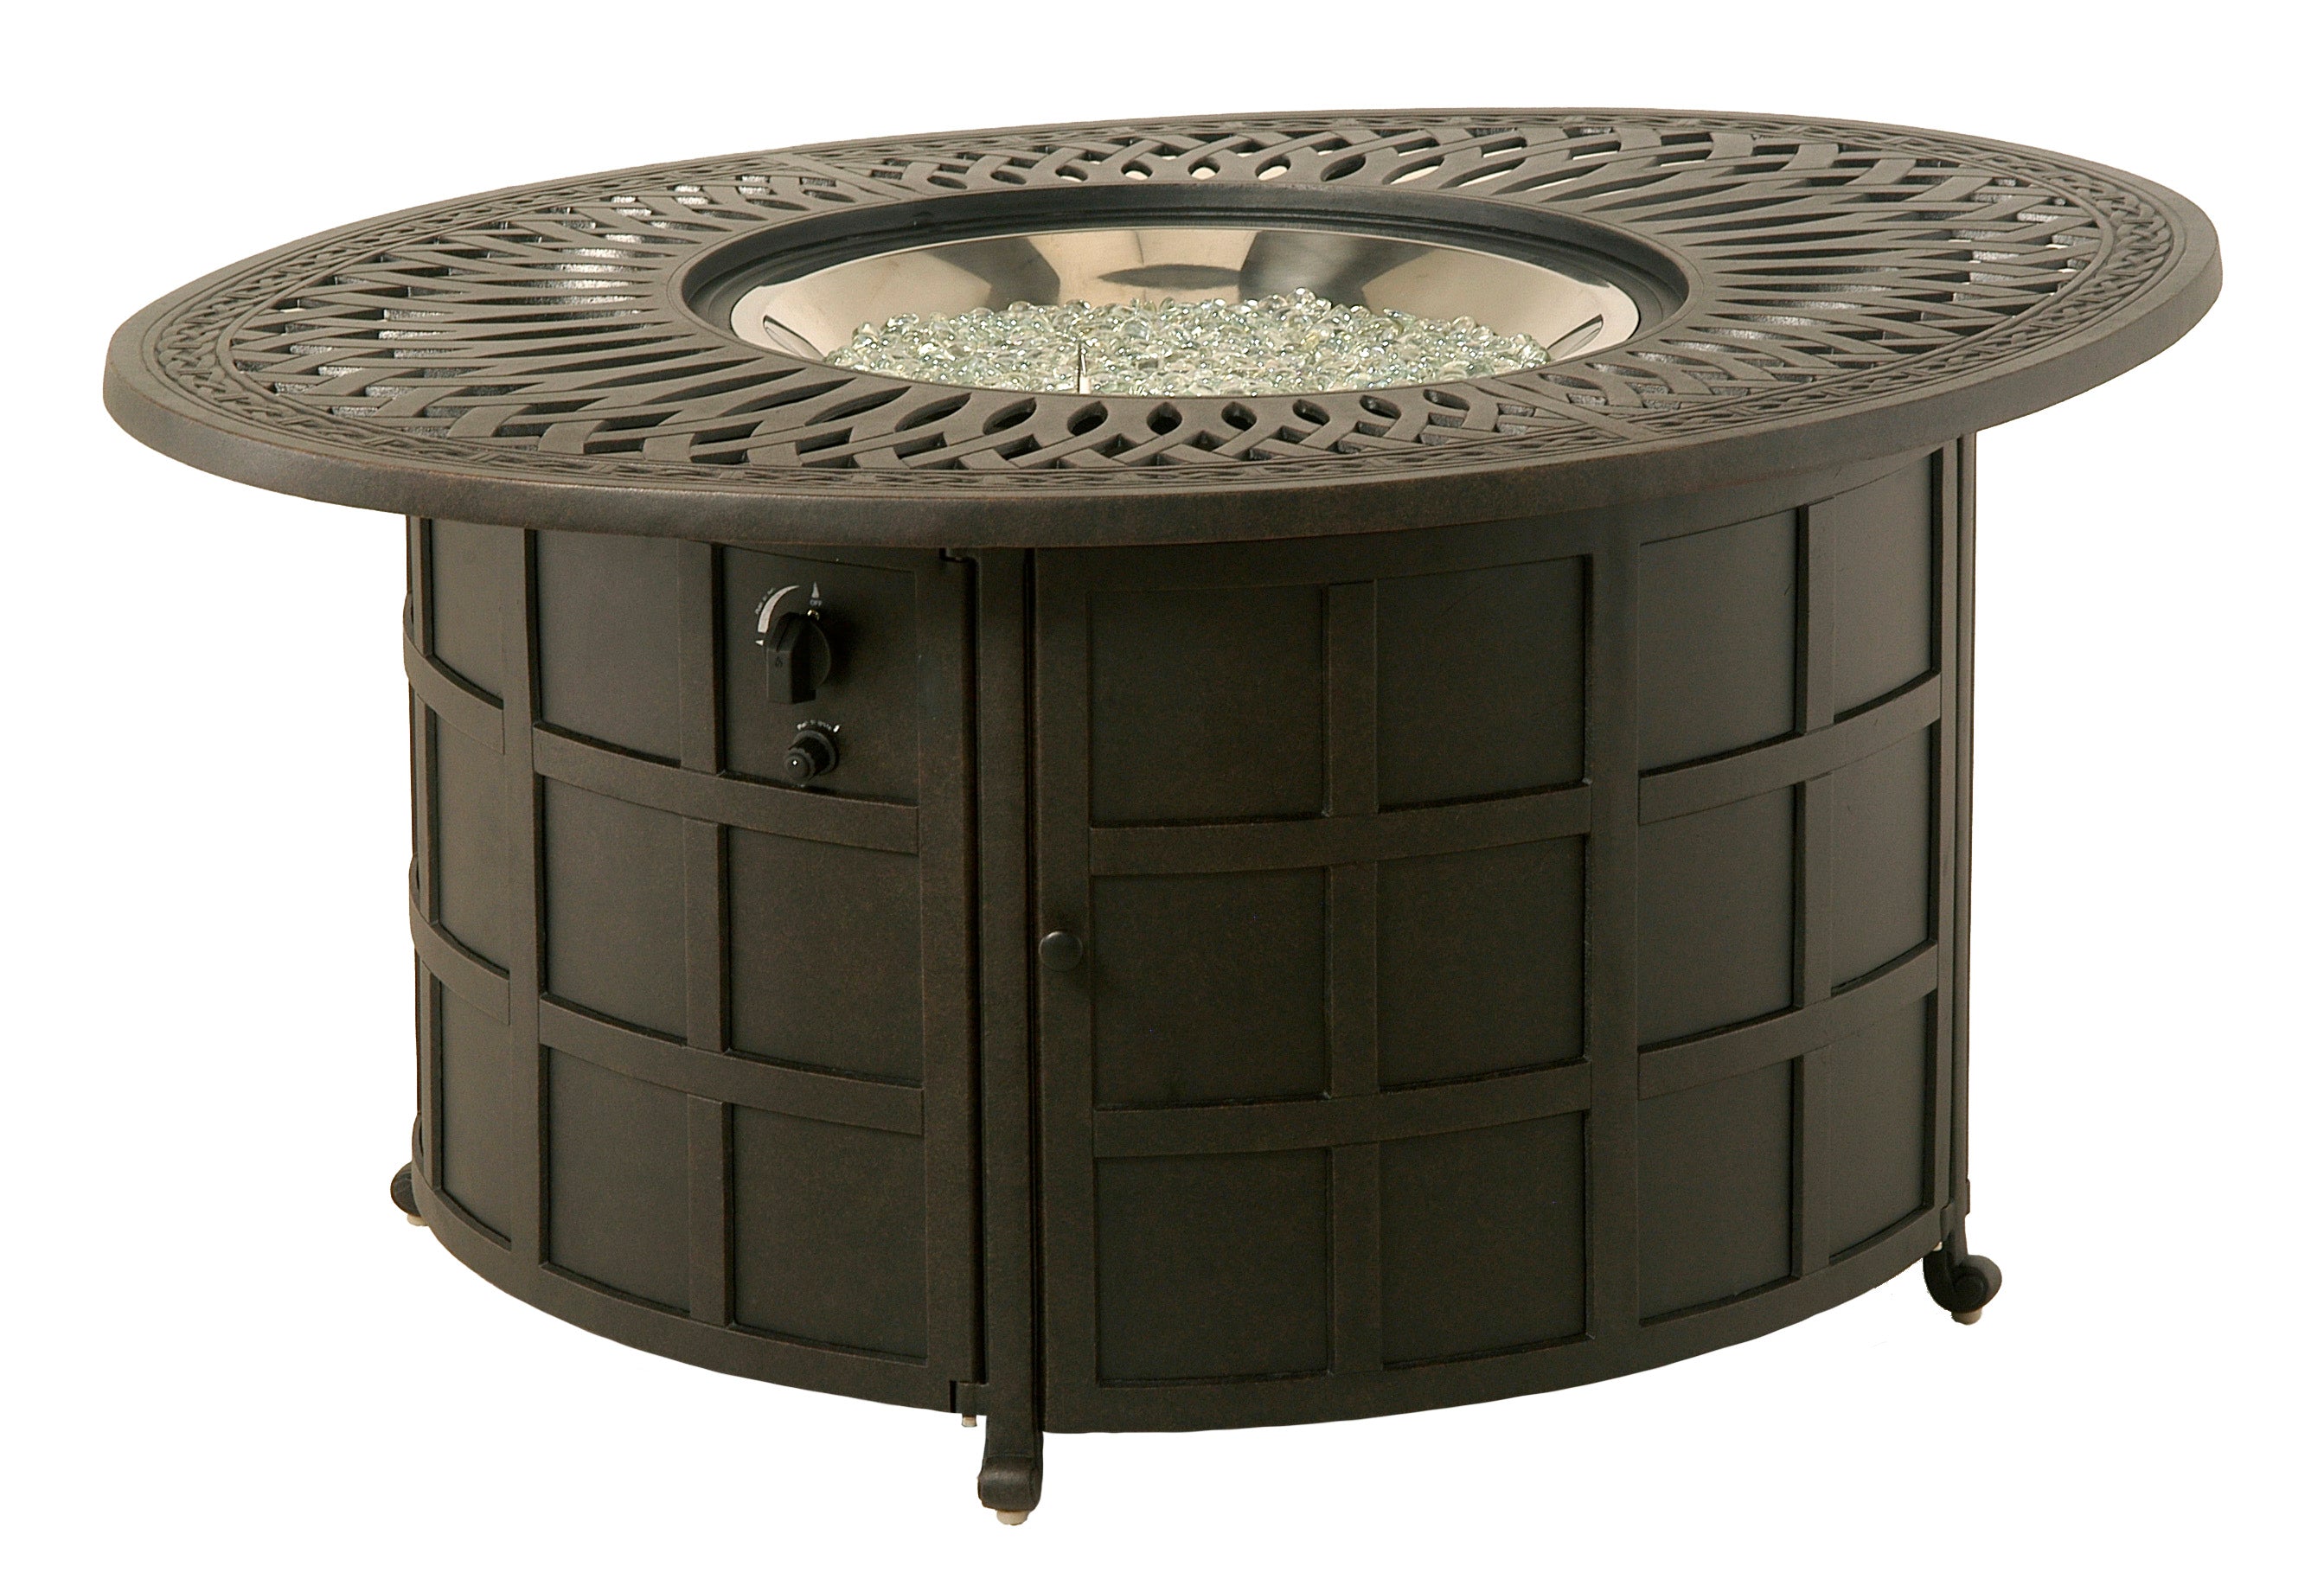 Hanamint Mayfair Oval Enclosed Gas Fire Pit Table Fireplaces 12039141